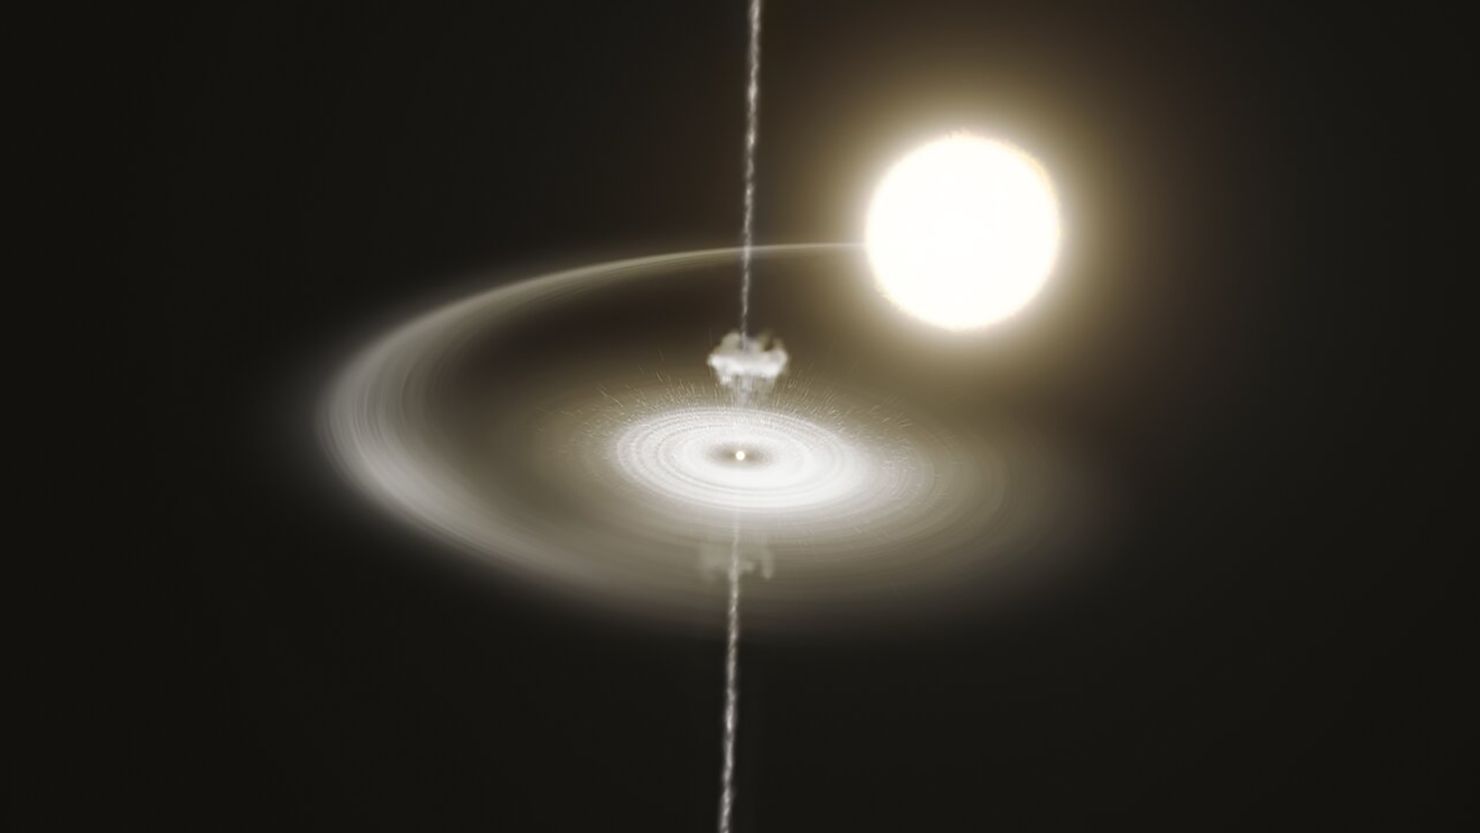 This artist's impression shows the pulsar PSR J1023+0038 stealing gas from its companion star. This gas accumulates in a disc around the pulsar, slowly falls towards it, and is eventually expelled in a narrow jet. In addition, there is a wind of particles blowing away from the pulsar, represented here by a cloud of very small dots. This wind clashes with the infalling gas, heating it up and making the system glow brightly in X-rays and ultraviolet and visible light. Eventually, blobs of this hot gas are expelled along the jet, and the pulsar returns to the initial, fainter state, repeating the cycle. This pulsar has been observed to switch incessantly between these two states every few seconds or minutes.